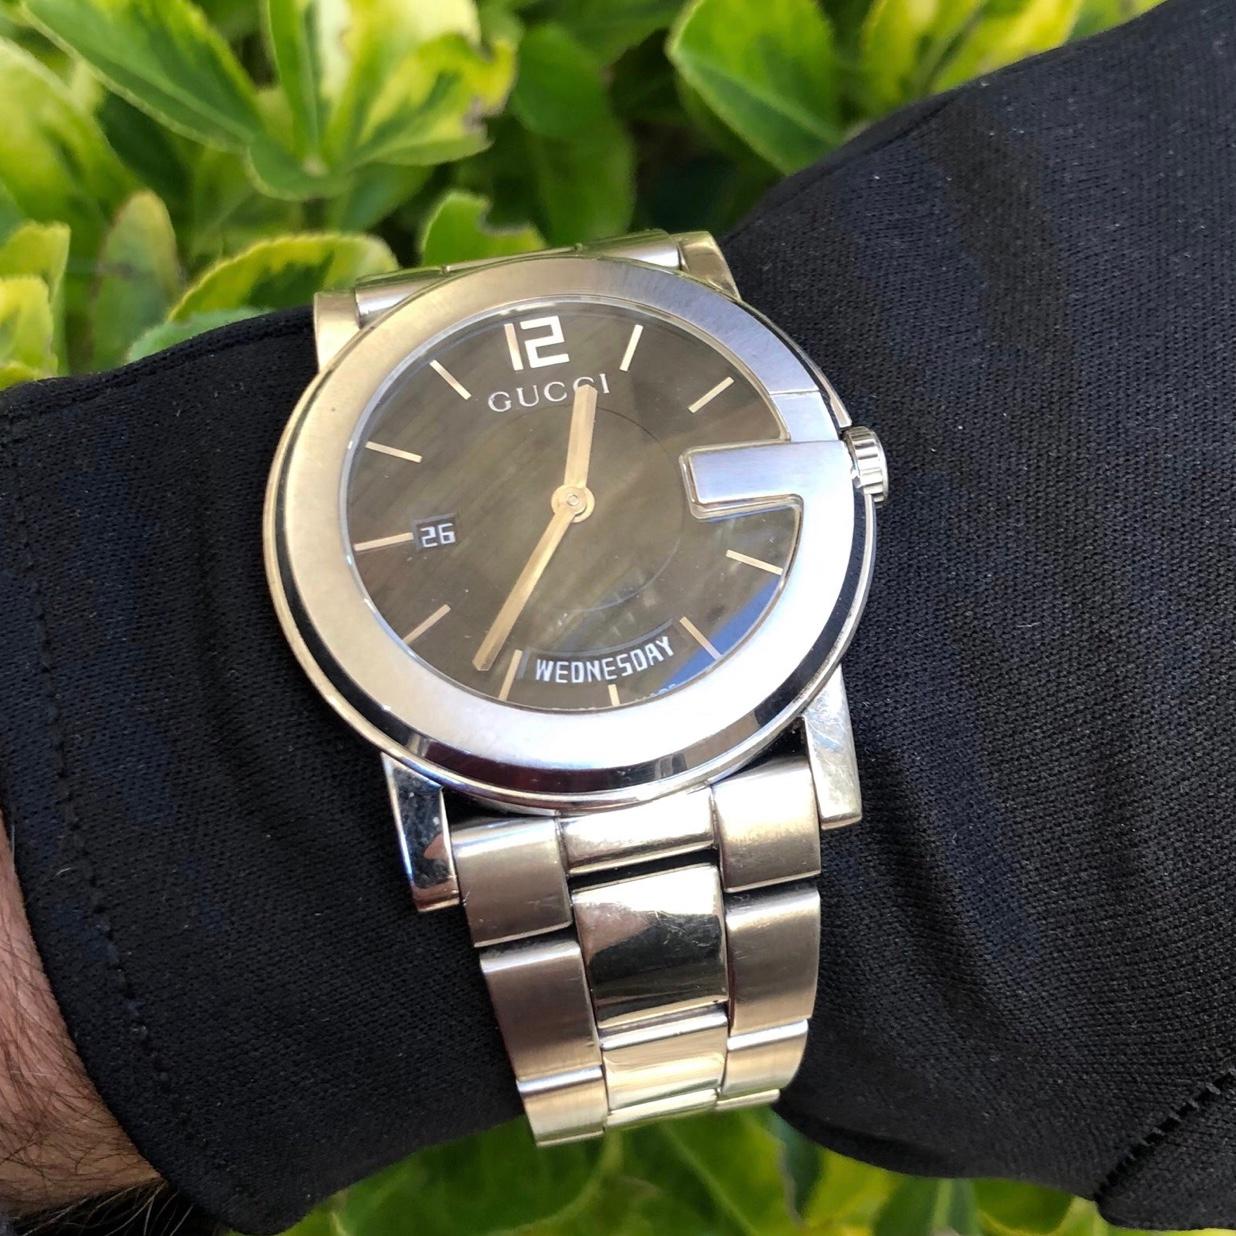 Gucci 101M Date Watch with box and warranty certificate.

This 101M timepiece by Gucci has a bold appearance on the wrist.

The black dial and G shaped bezel add to its appearance. It features a date and day of the week function.

This rare 101M